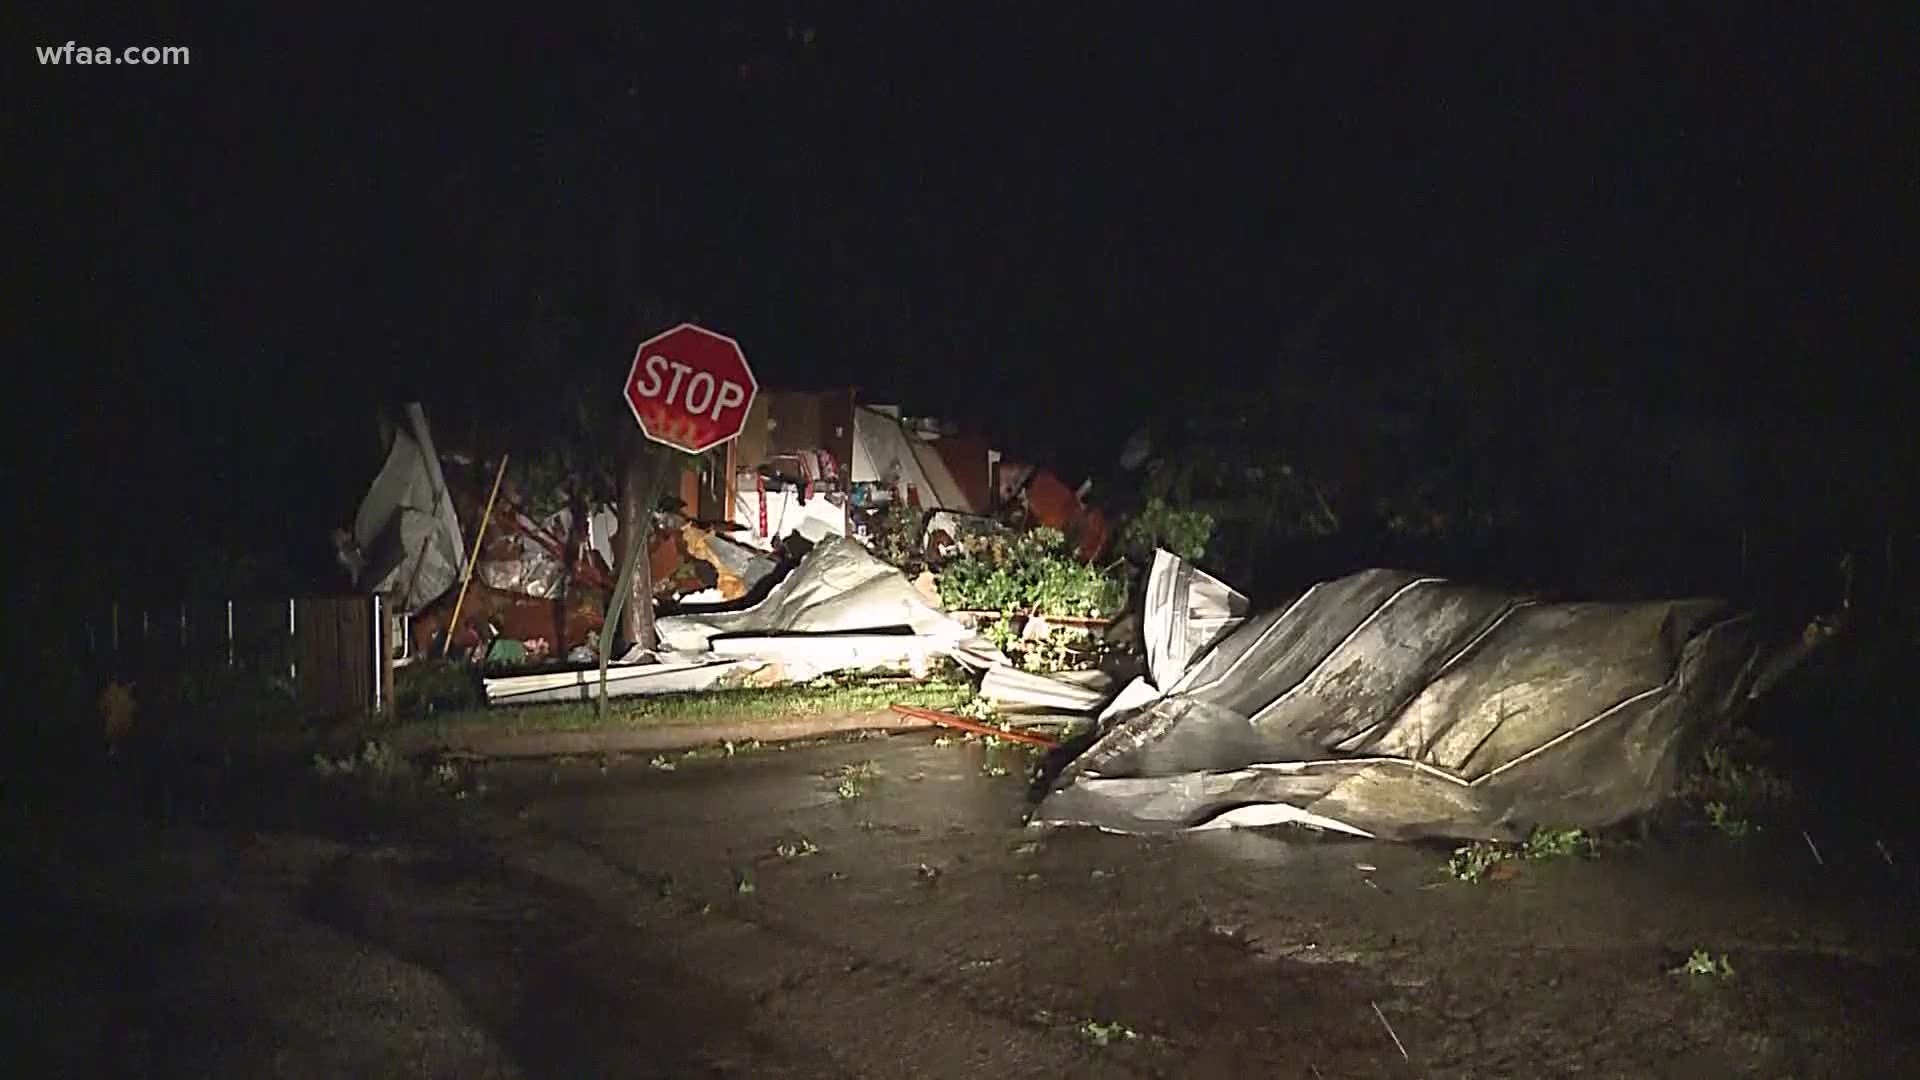 The Friday night storm caused power outages and brought reports of damages to homes and buildings.